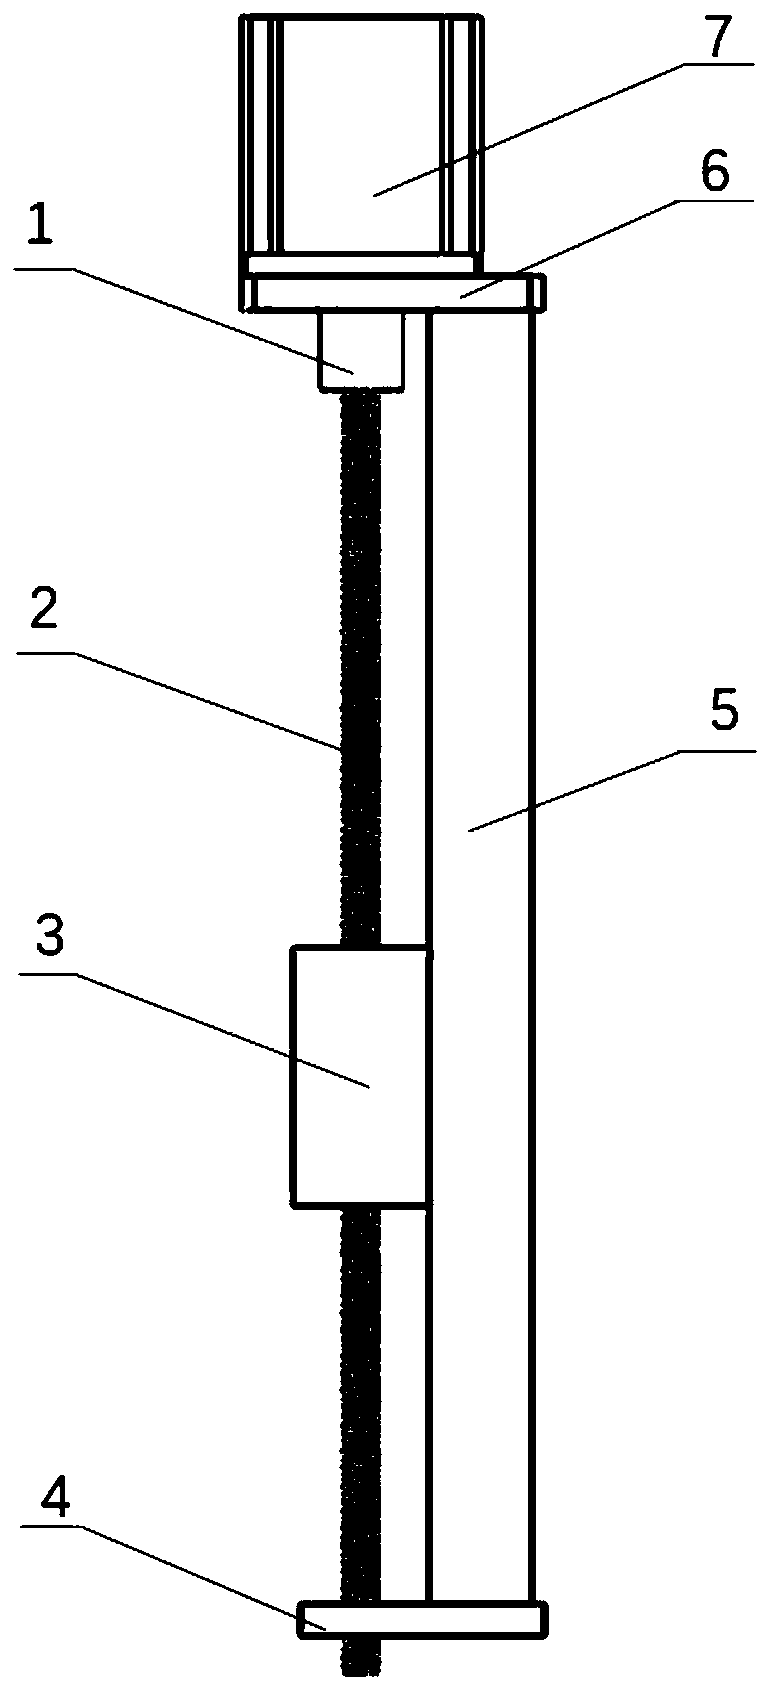 Plunger type continuous extrusion device for additive manufacturing of energetic material